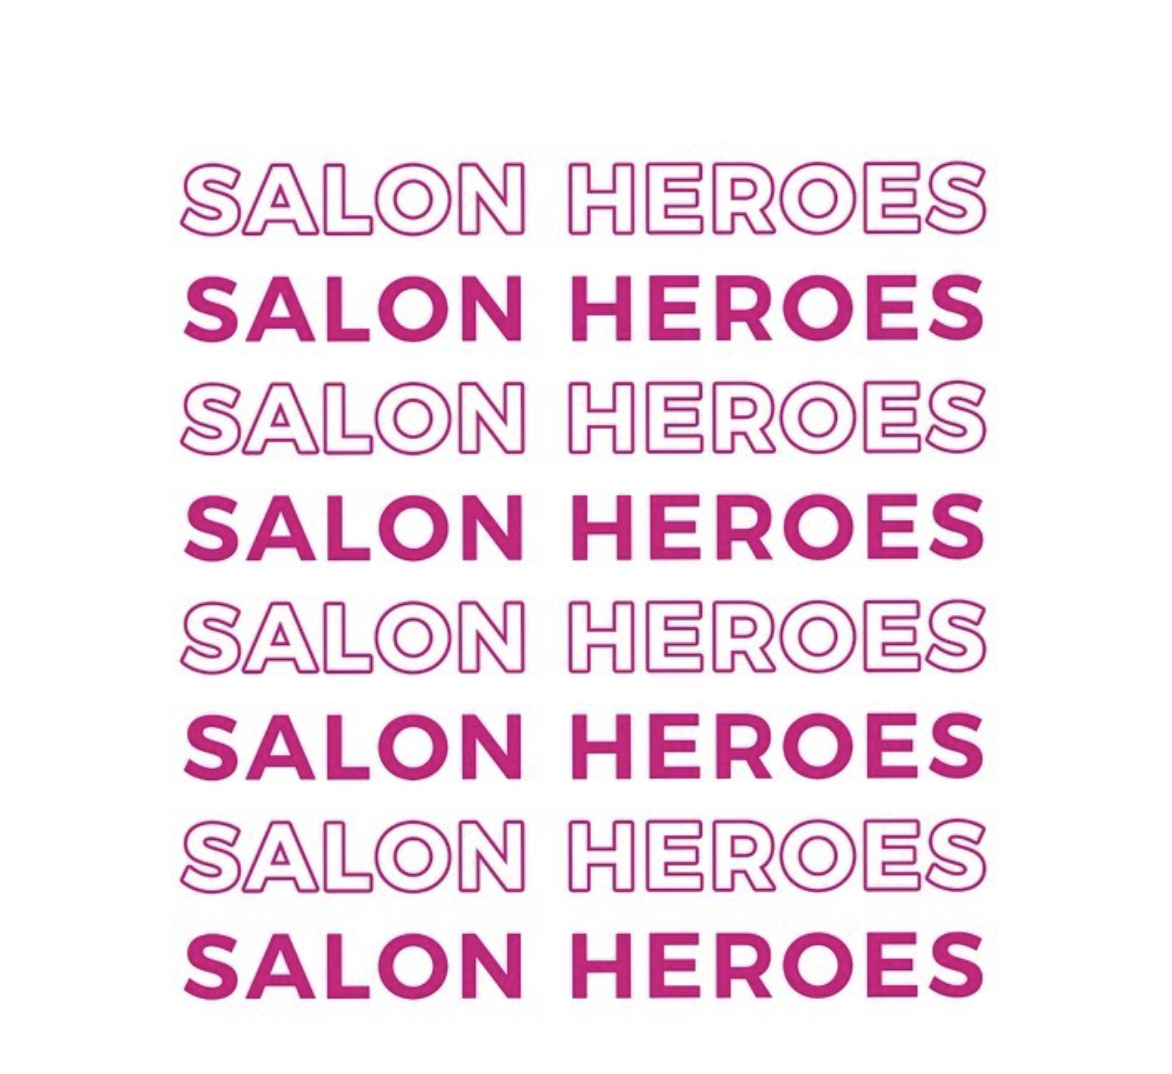 dyson-&-mane-addicts-team-up-to-support-salon-heroes-+-more-beauty-news-this-week